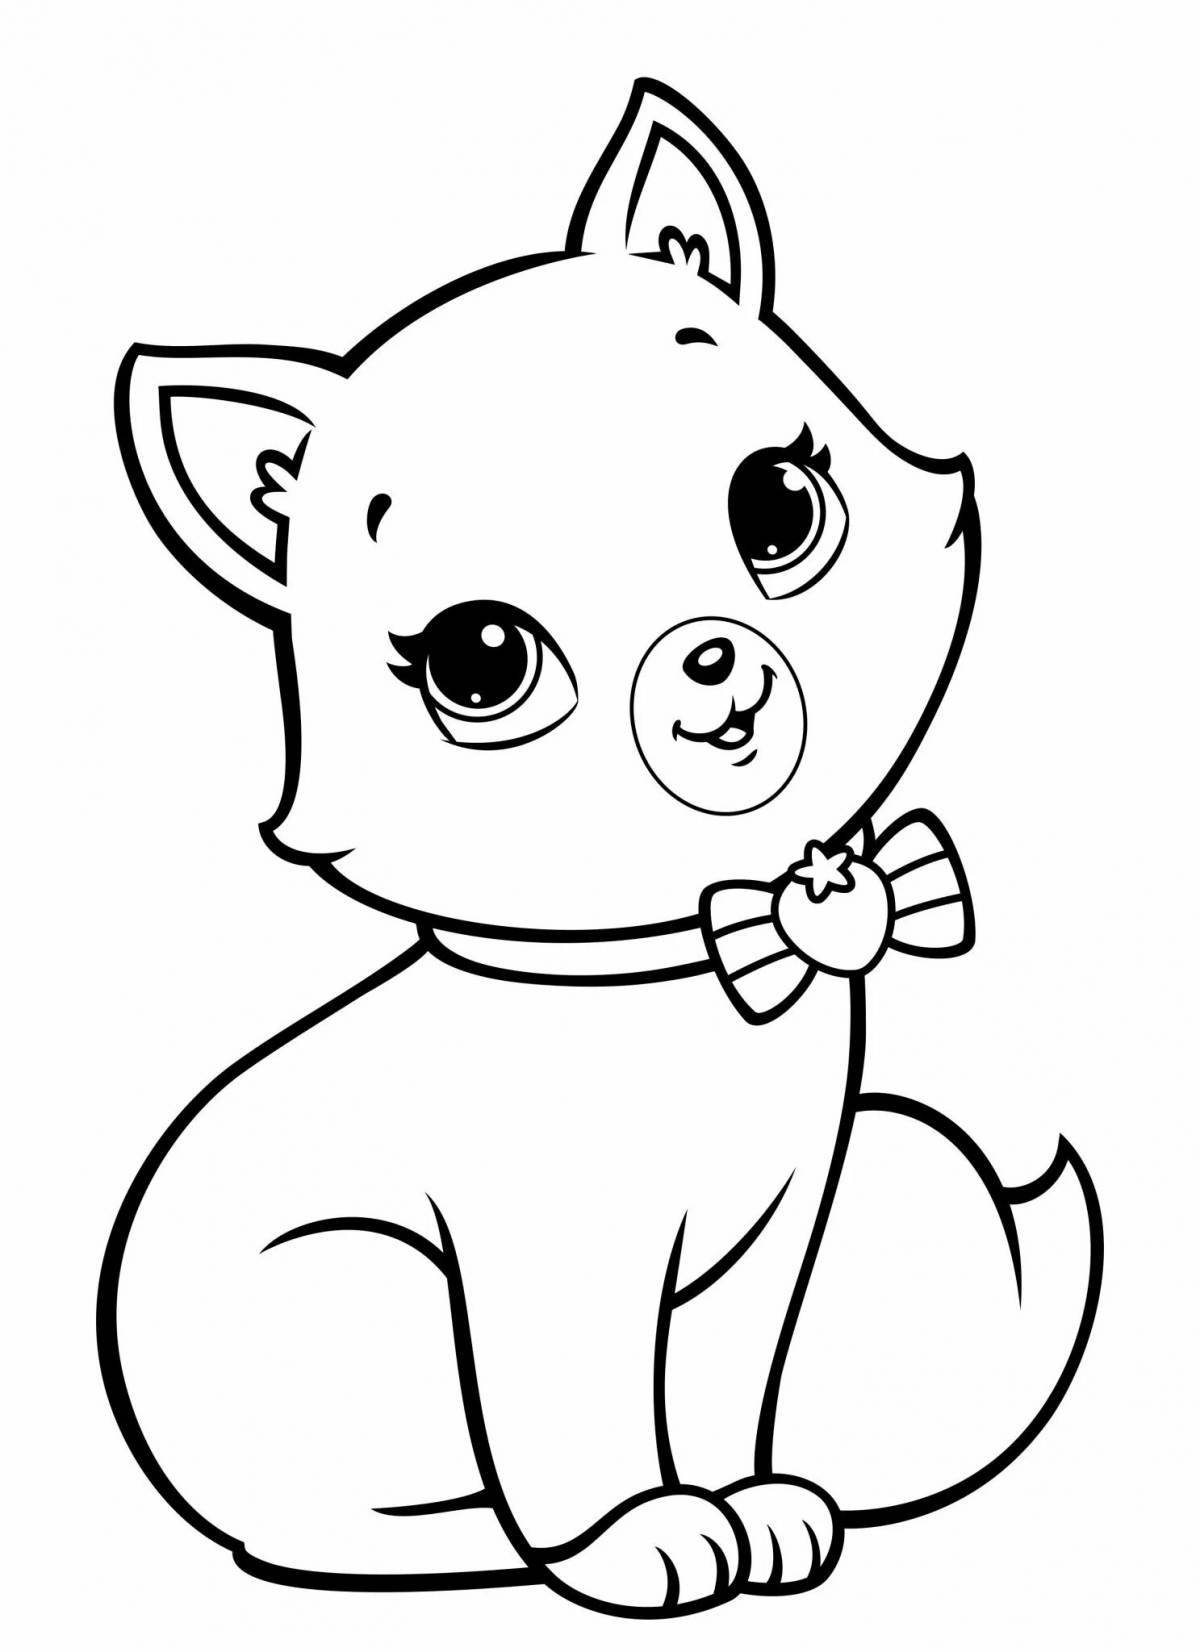 Playable pussy and doggy coloring page